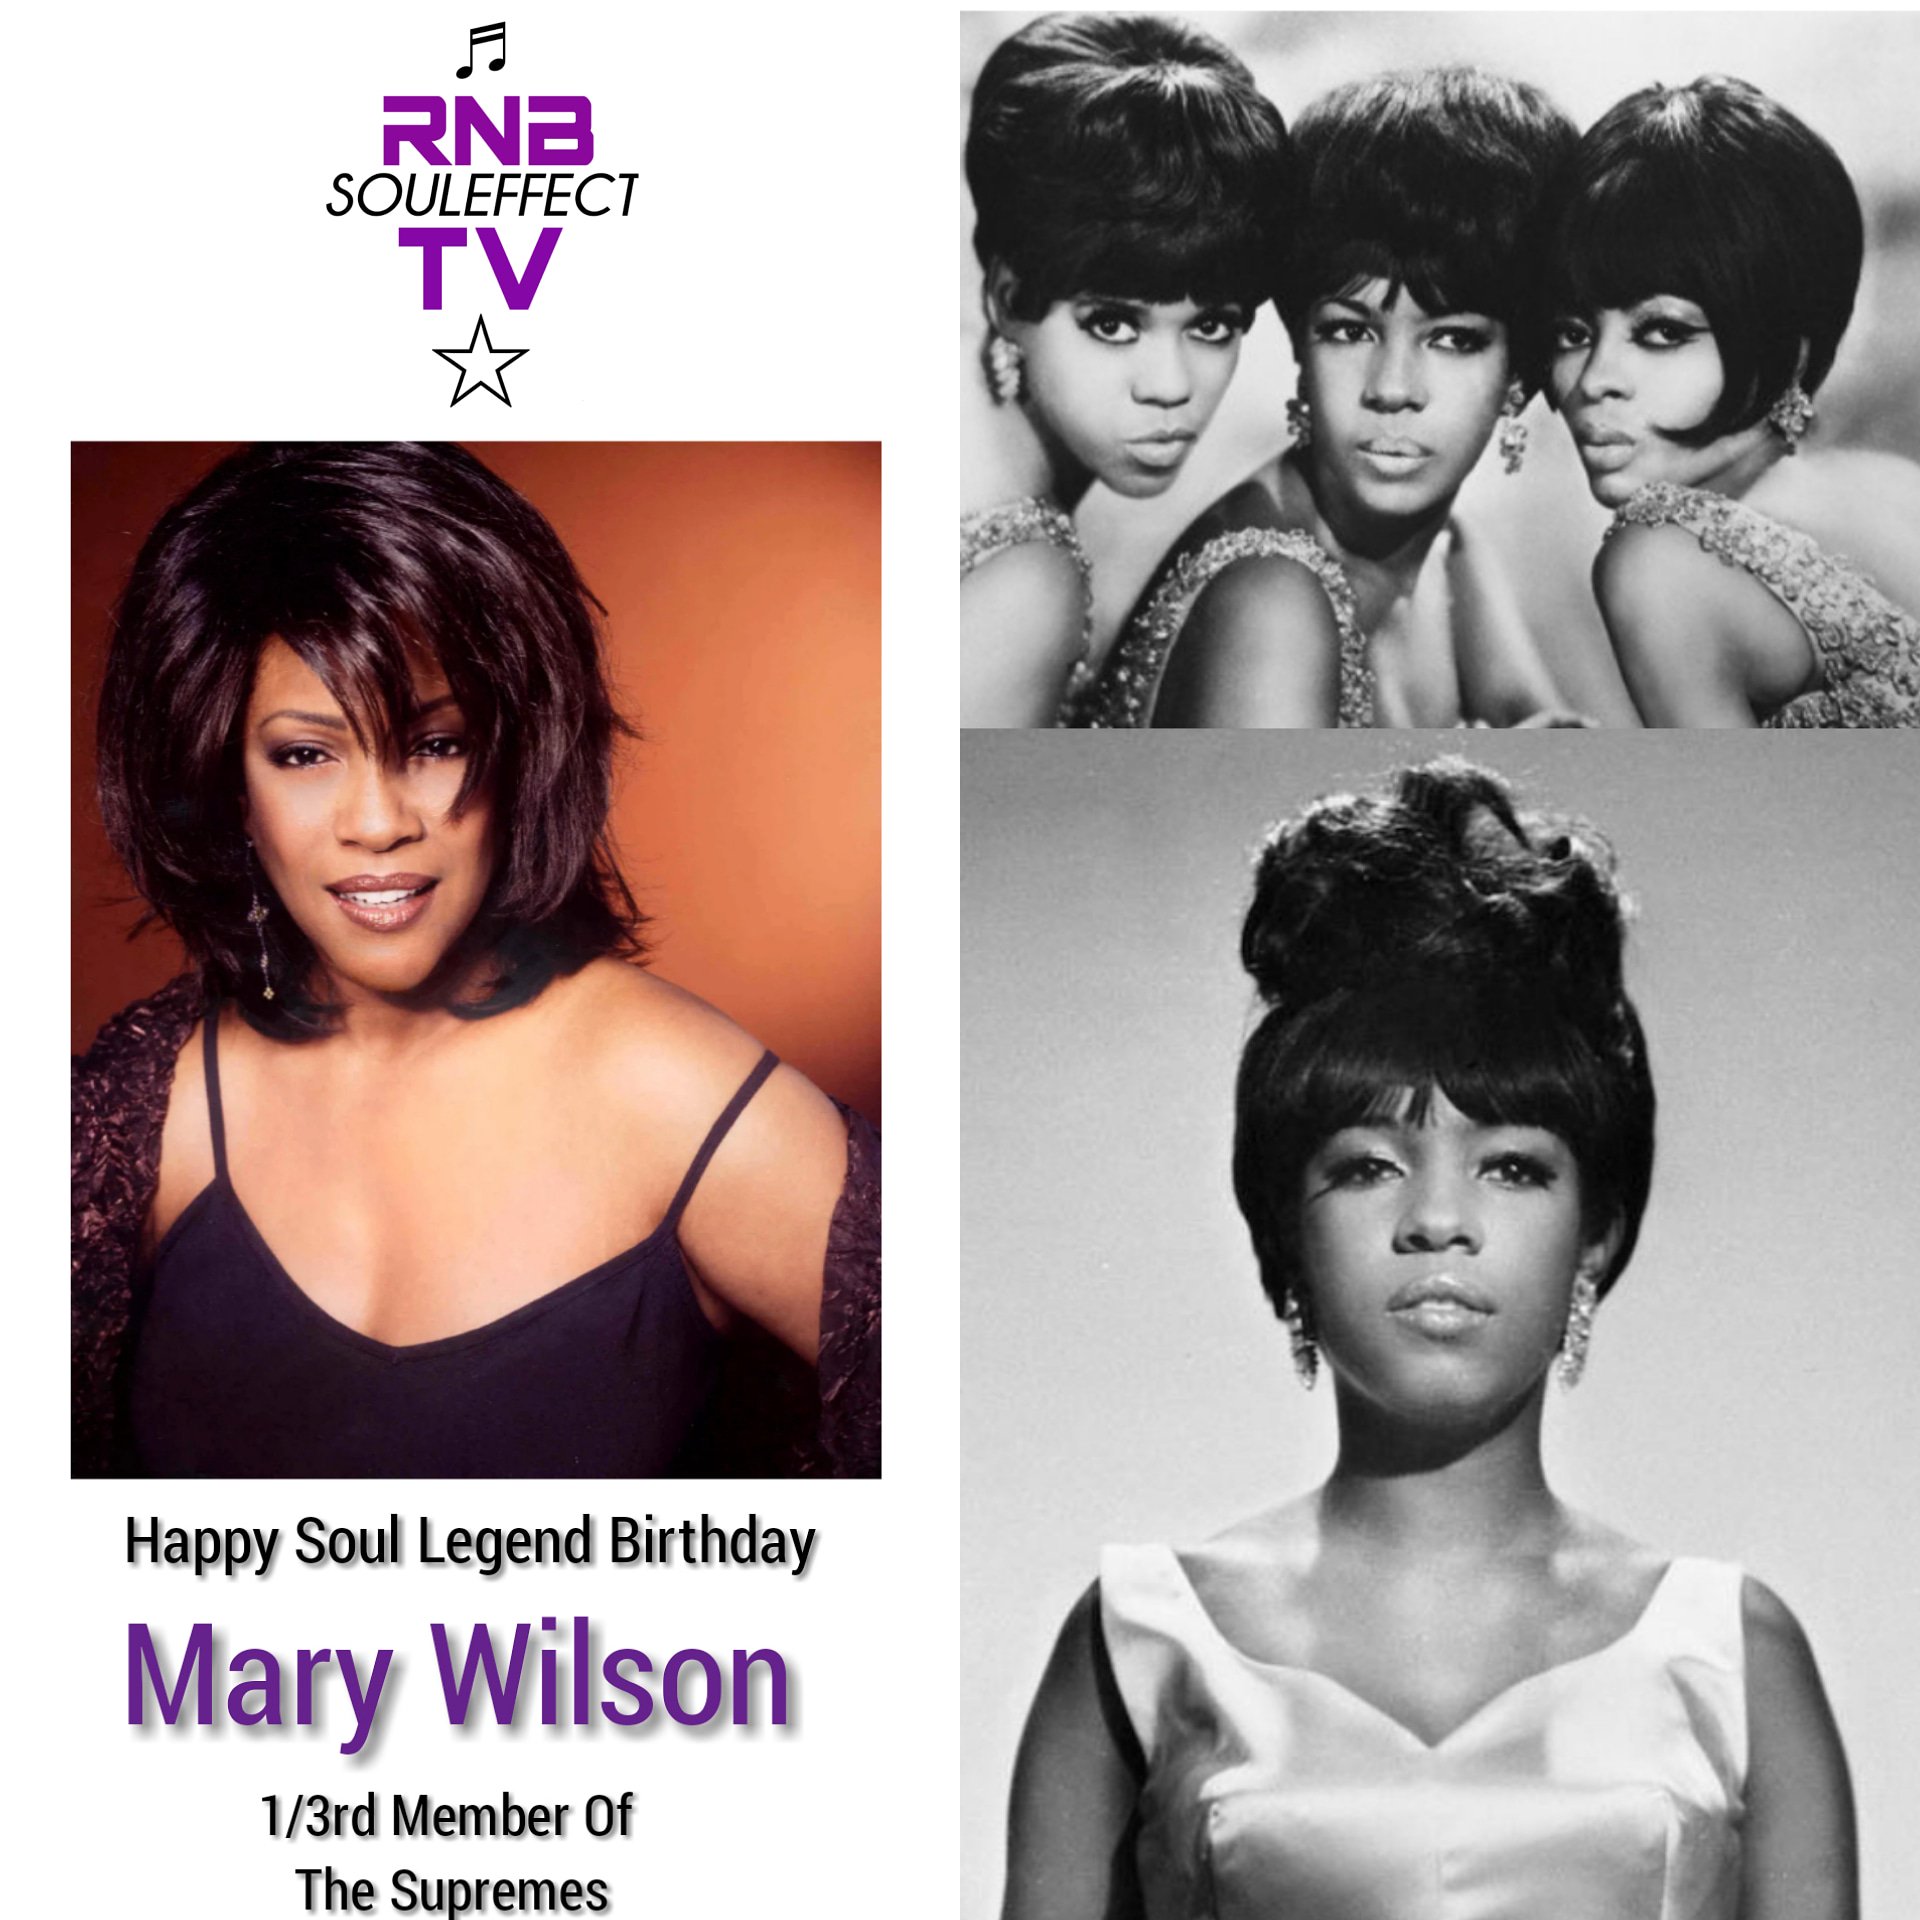 Happy Soul Legend Birthday Mary Wilson 1/3rd Member Of The Supremes 